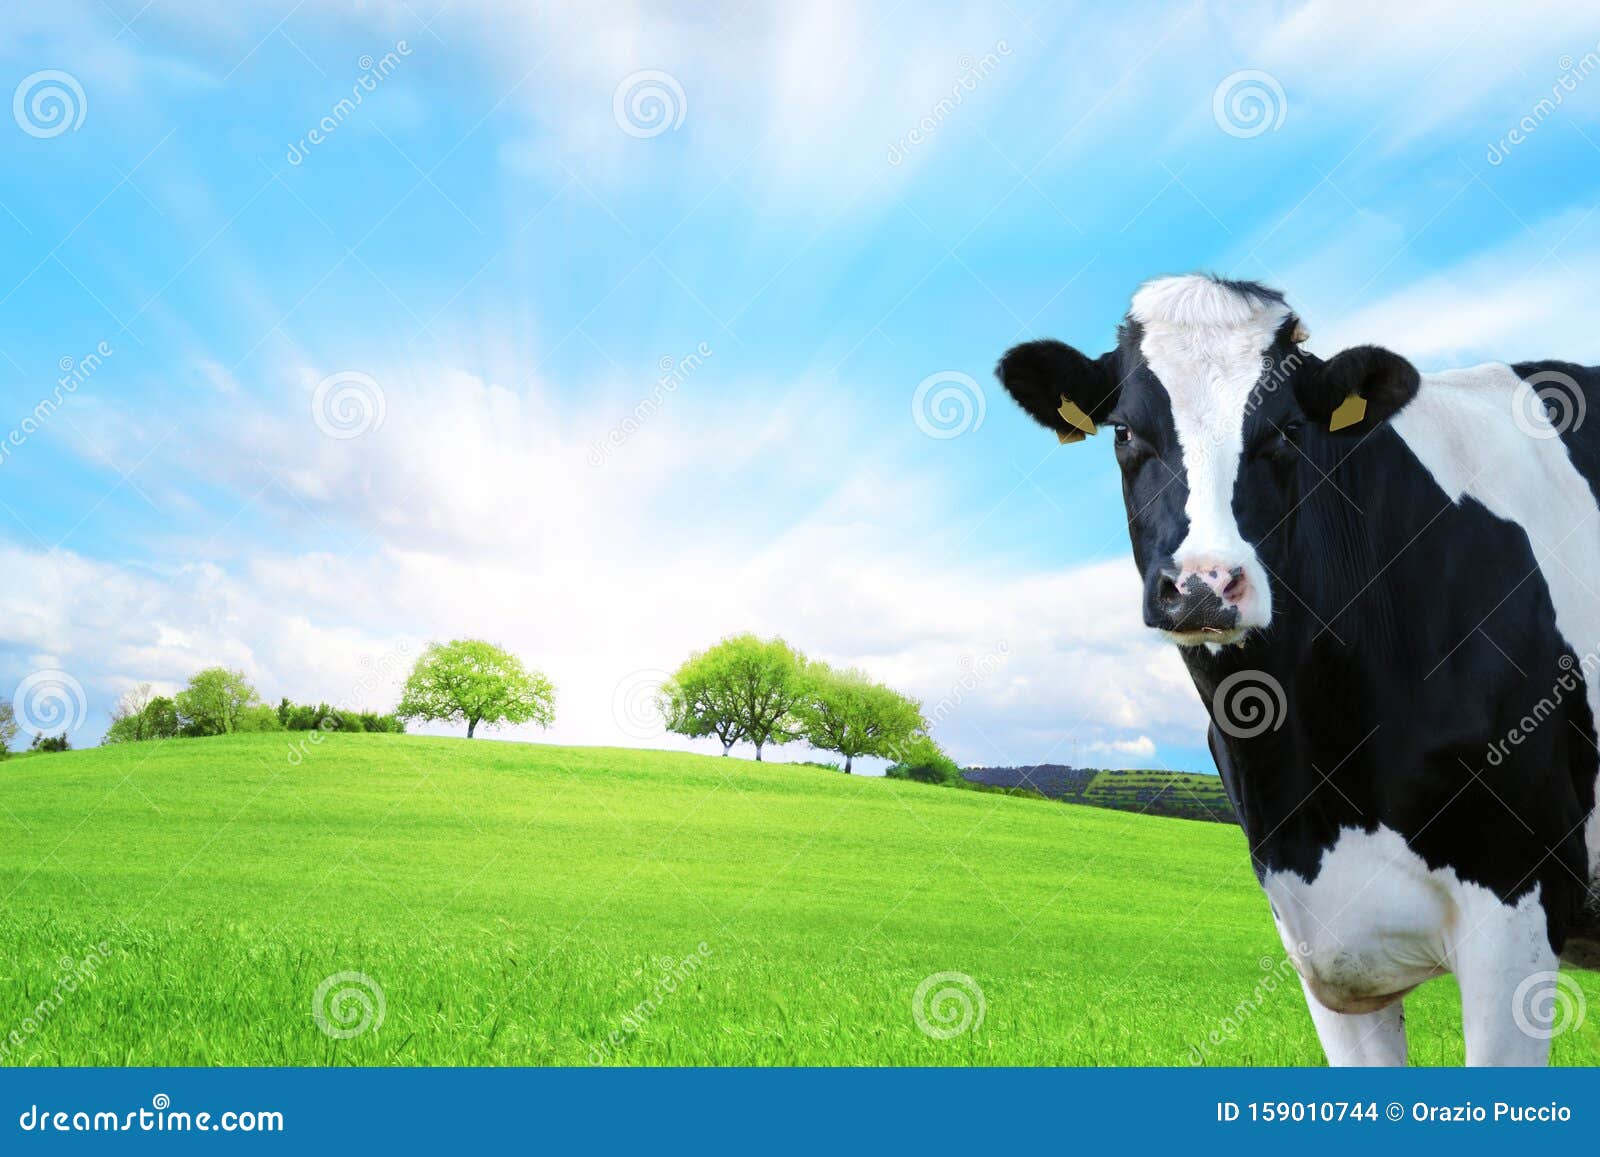 Dairy Cow In The Foreground With Green Pasture As A Background Stock ...